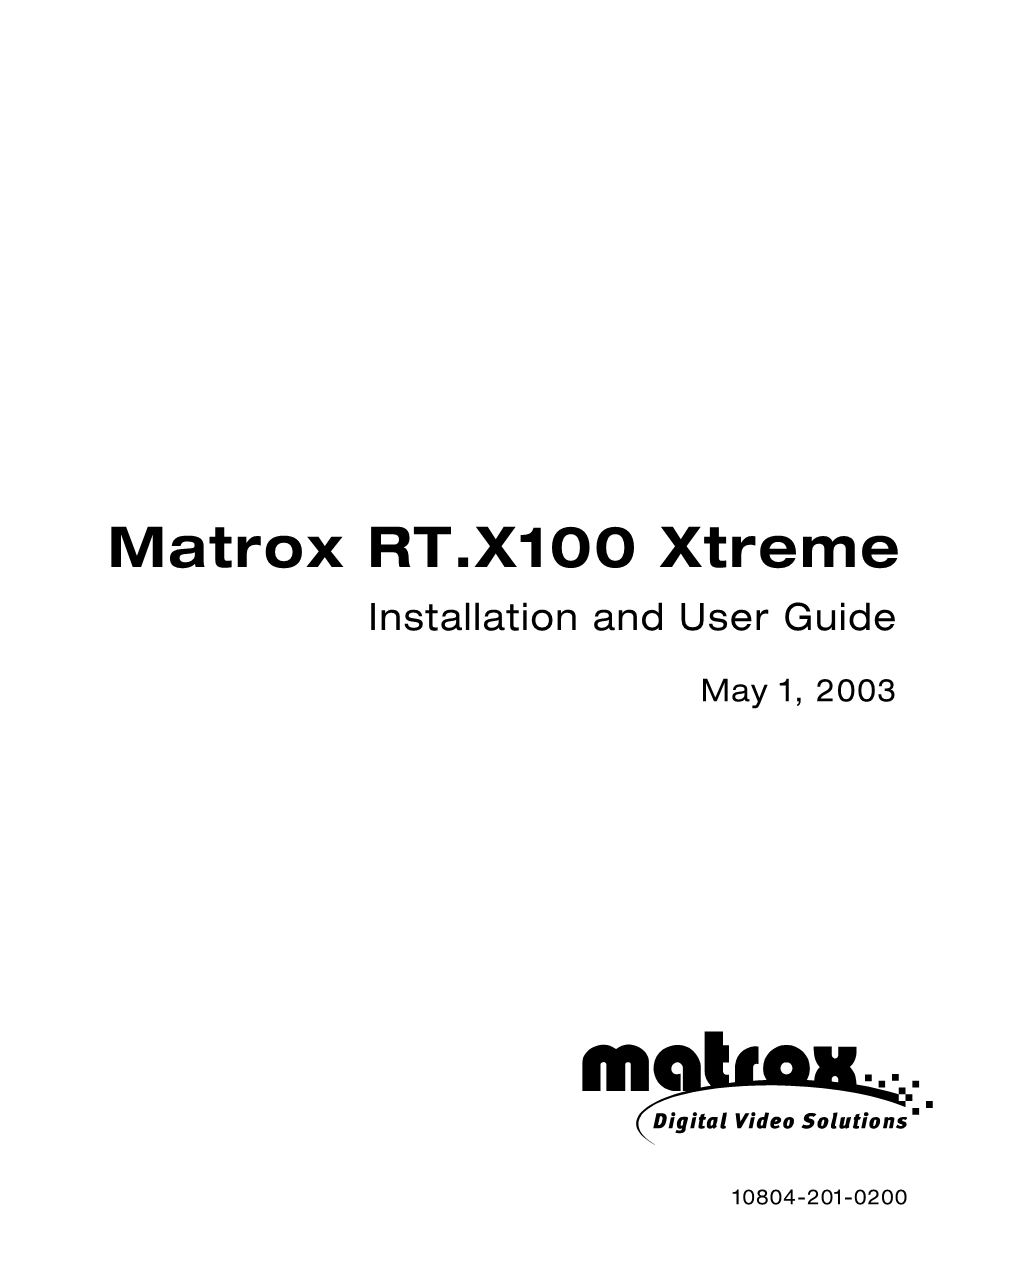 Matrox RT.X100 Xtreme Installation and User Guide